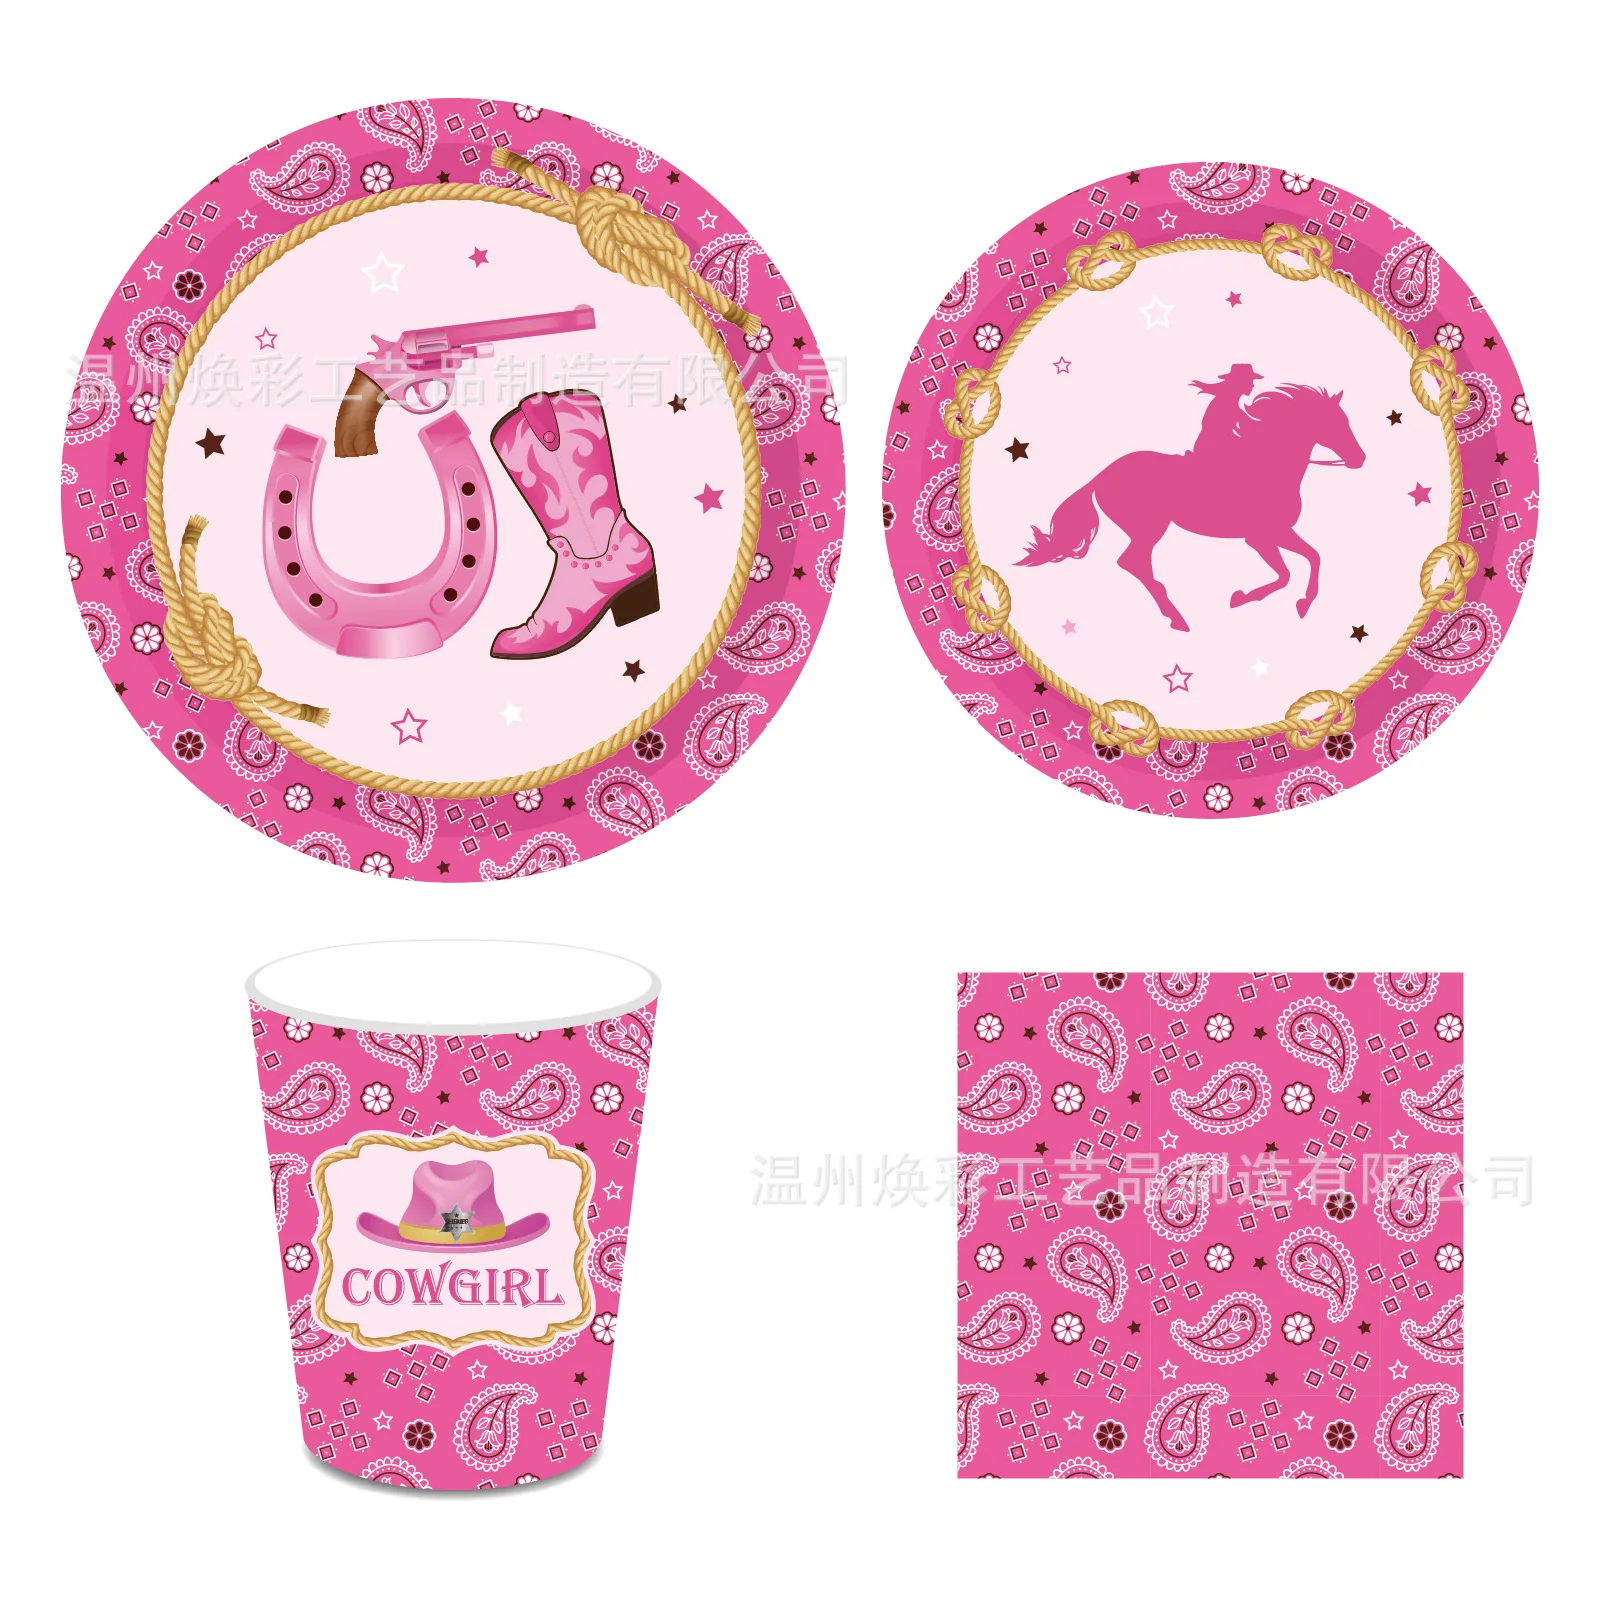 

8 Guests Pink Cow Girl Birthday Disposable Tableware Pink Horse Cowgirl Plates Cups Happy Cowgirl Theme Birthday Party Supplies